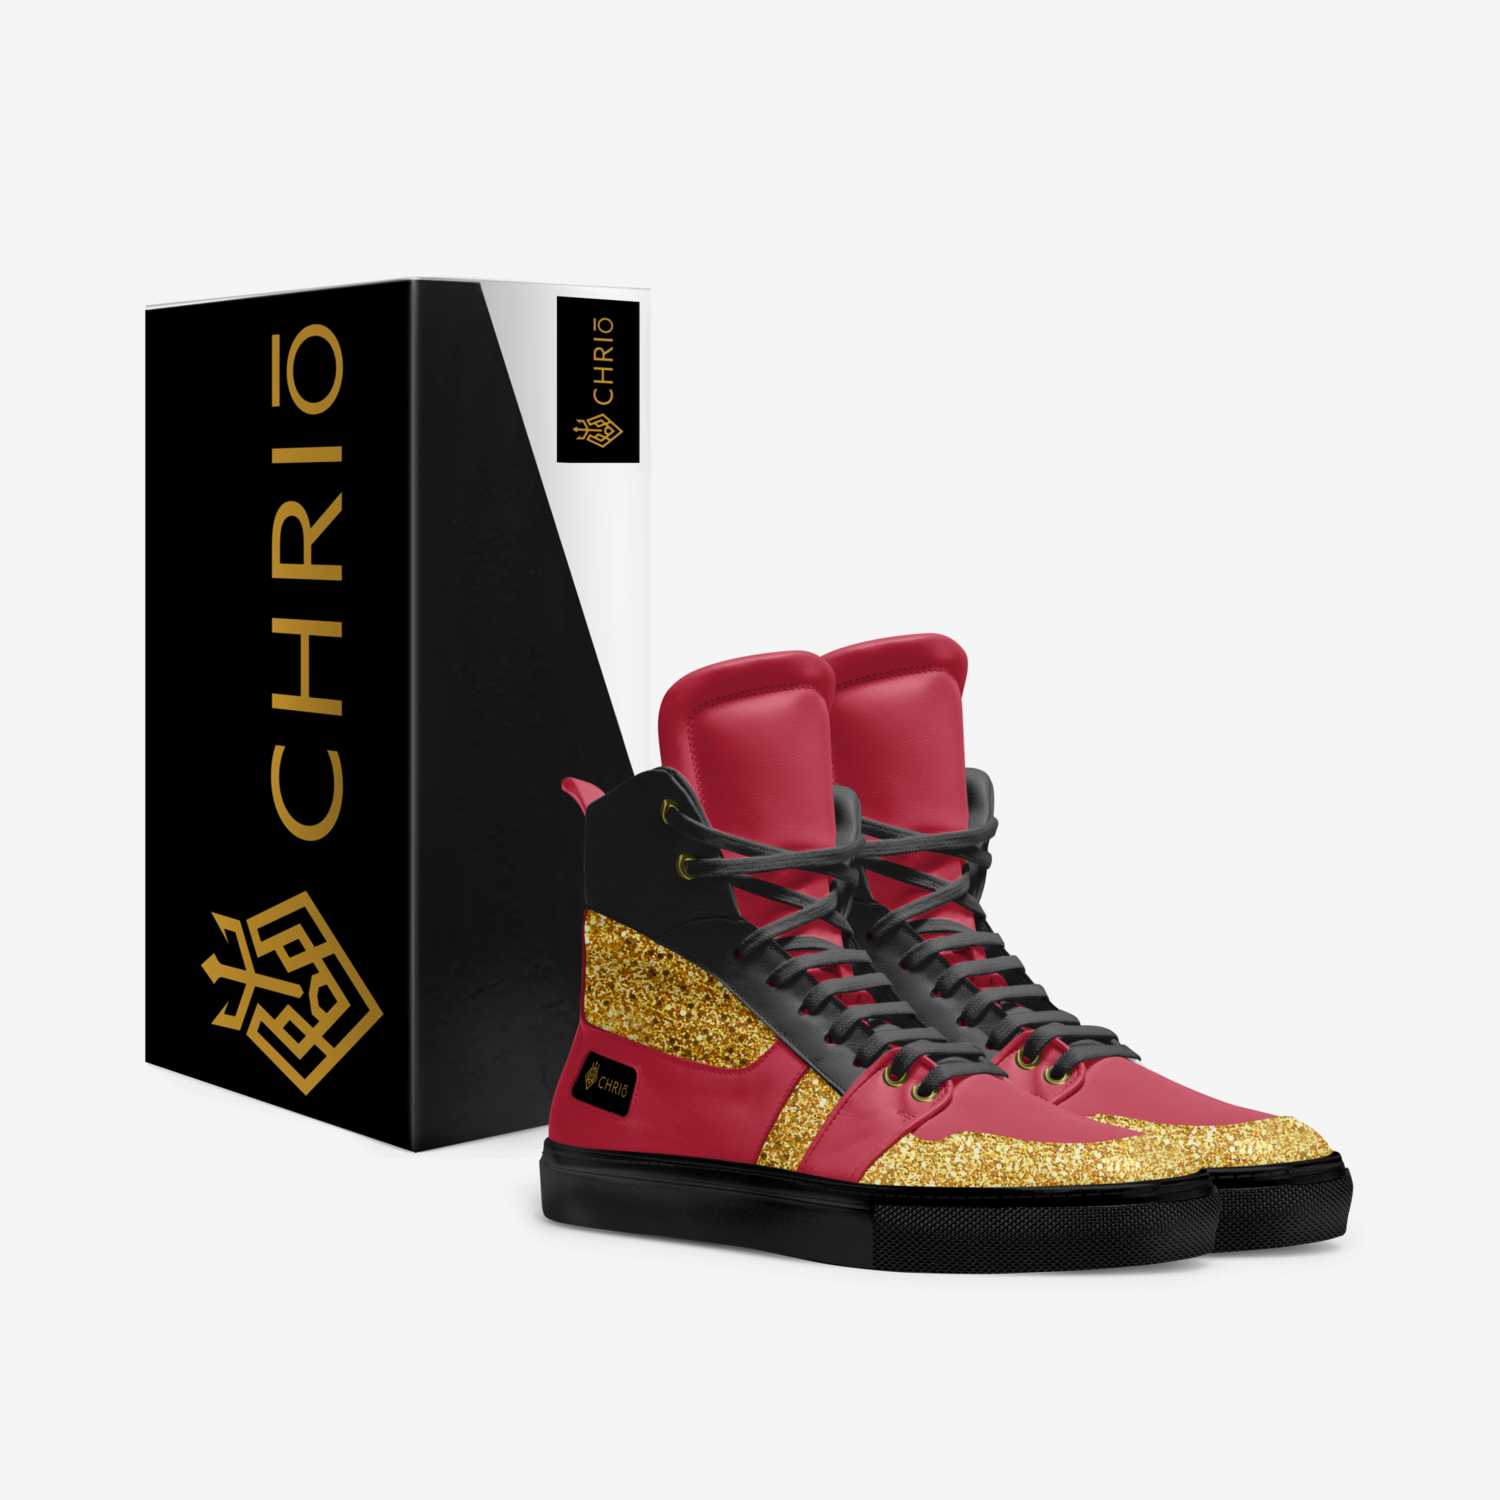  CHRIō  custom made in Italy shoes by Hakeem Collins | Box view